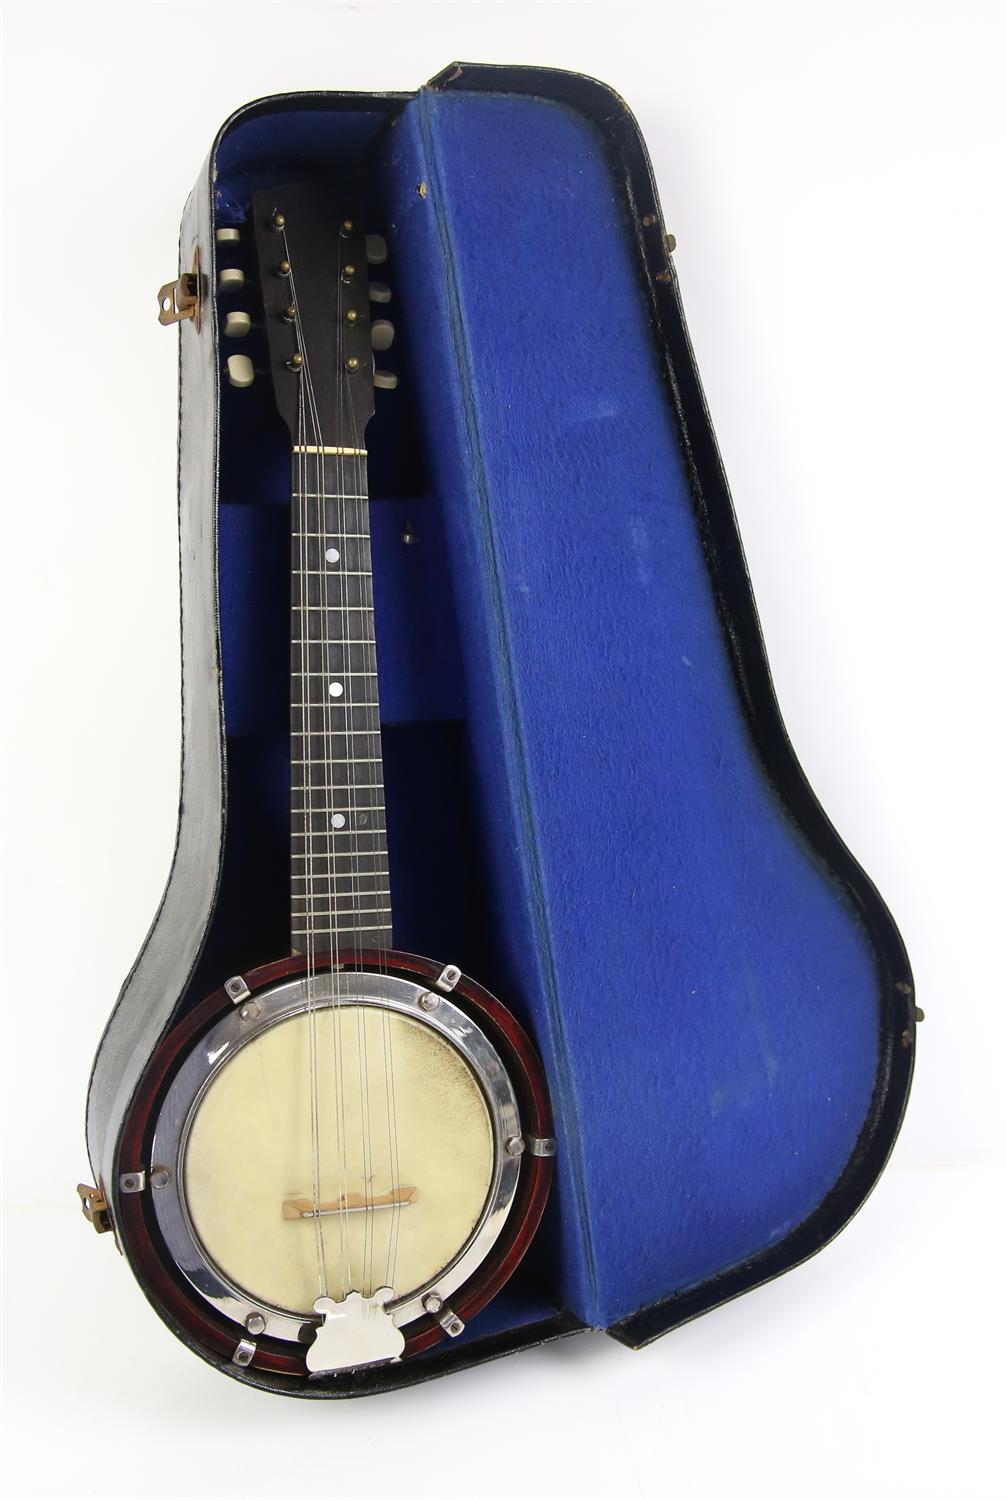 English eight string Banjolin with seventeen frets, mother of pearl dot inlay, stamped 'English